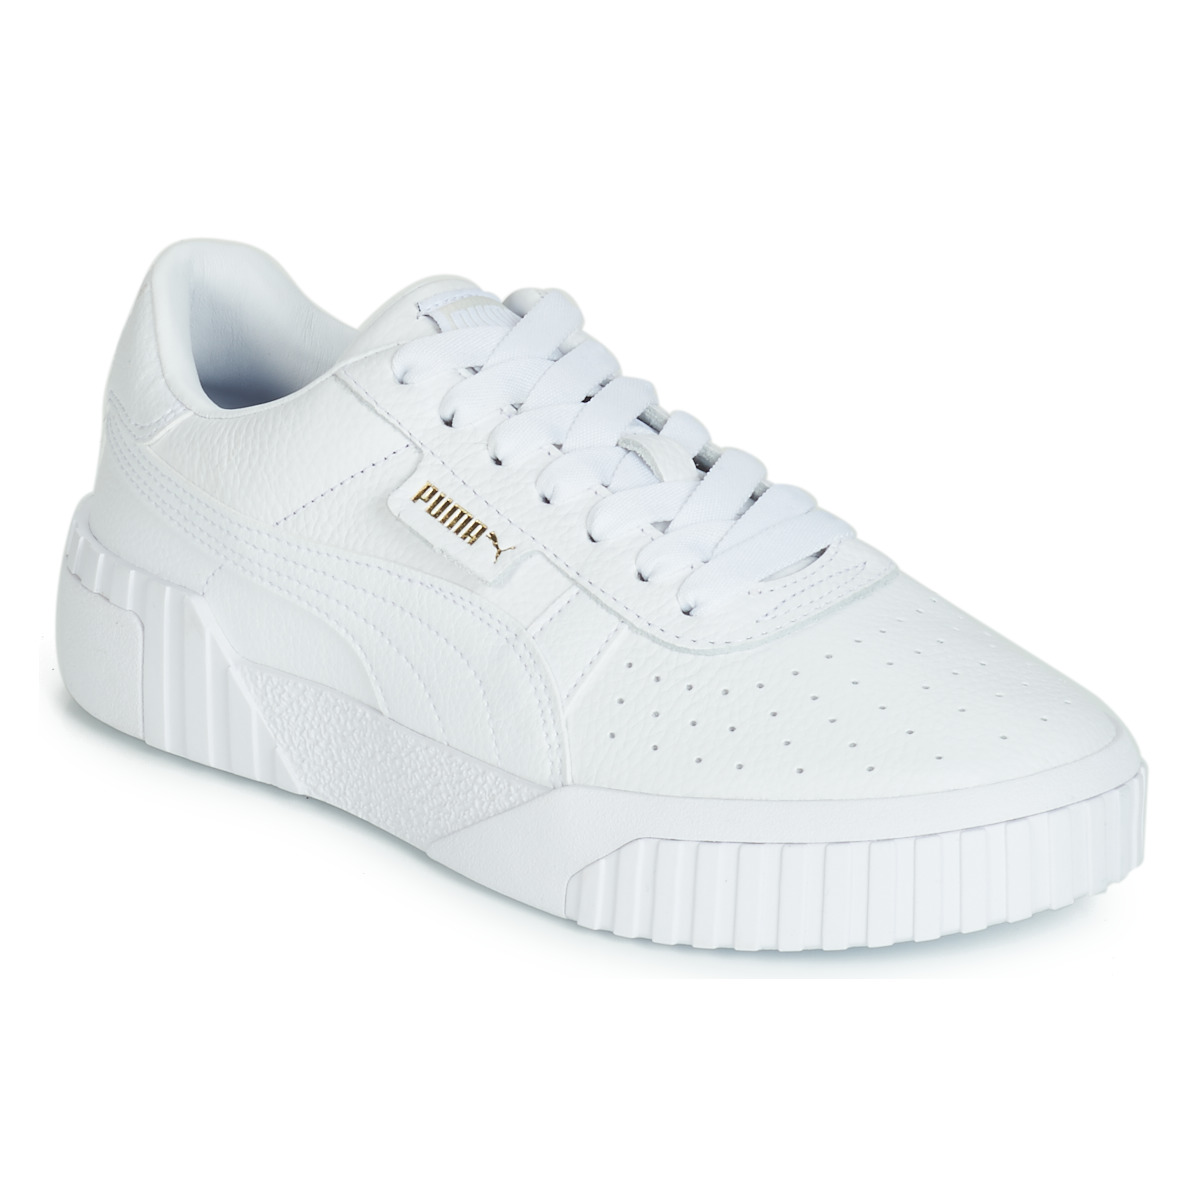 puma cali blanche enfant Online Shopping mall | Find the best ...